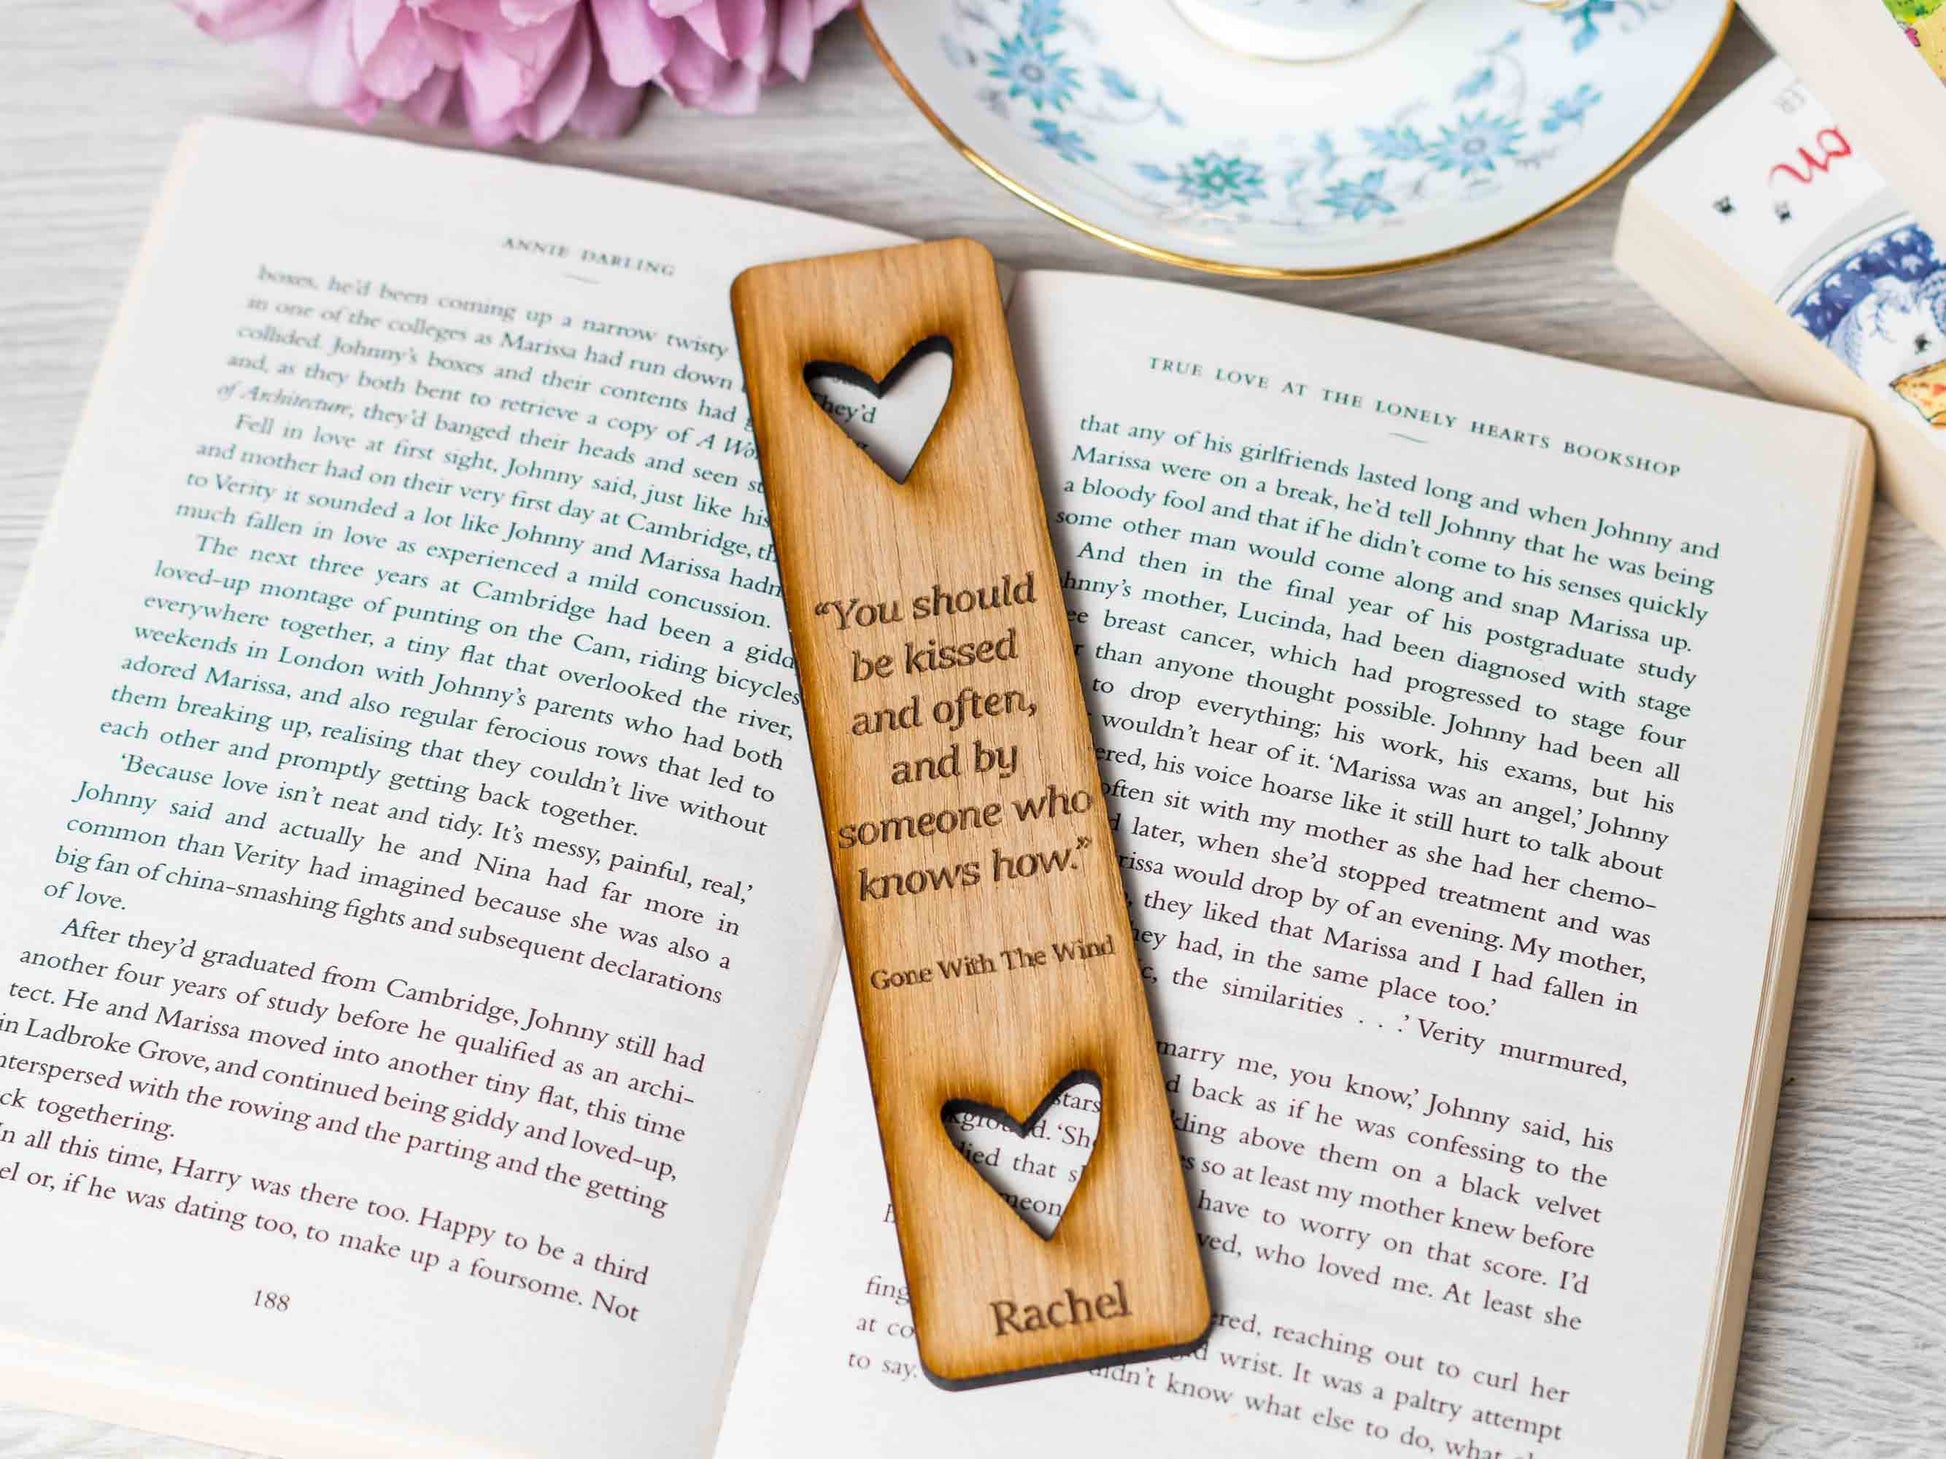 Gone with the wind quote on personalised bookmark